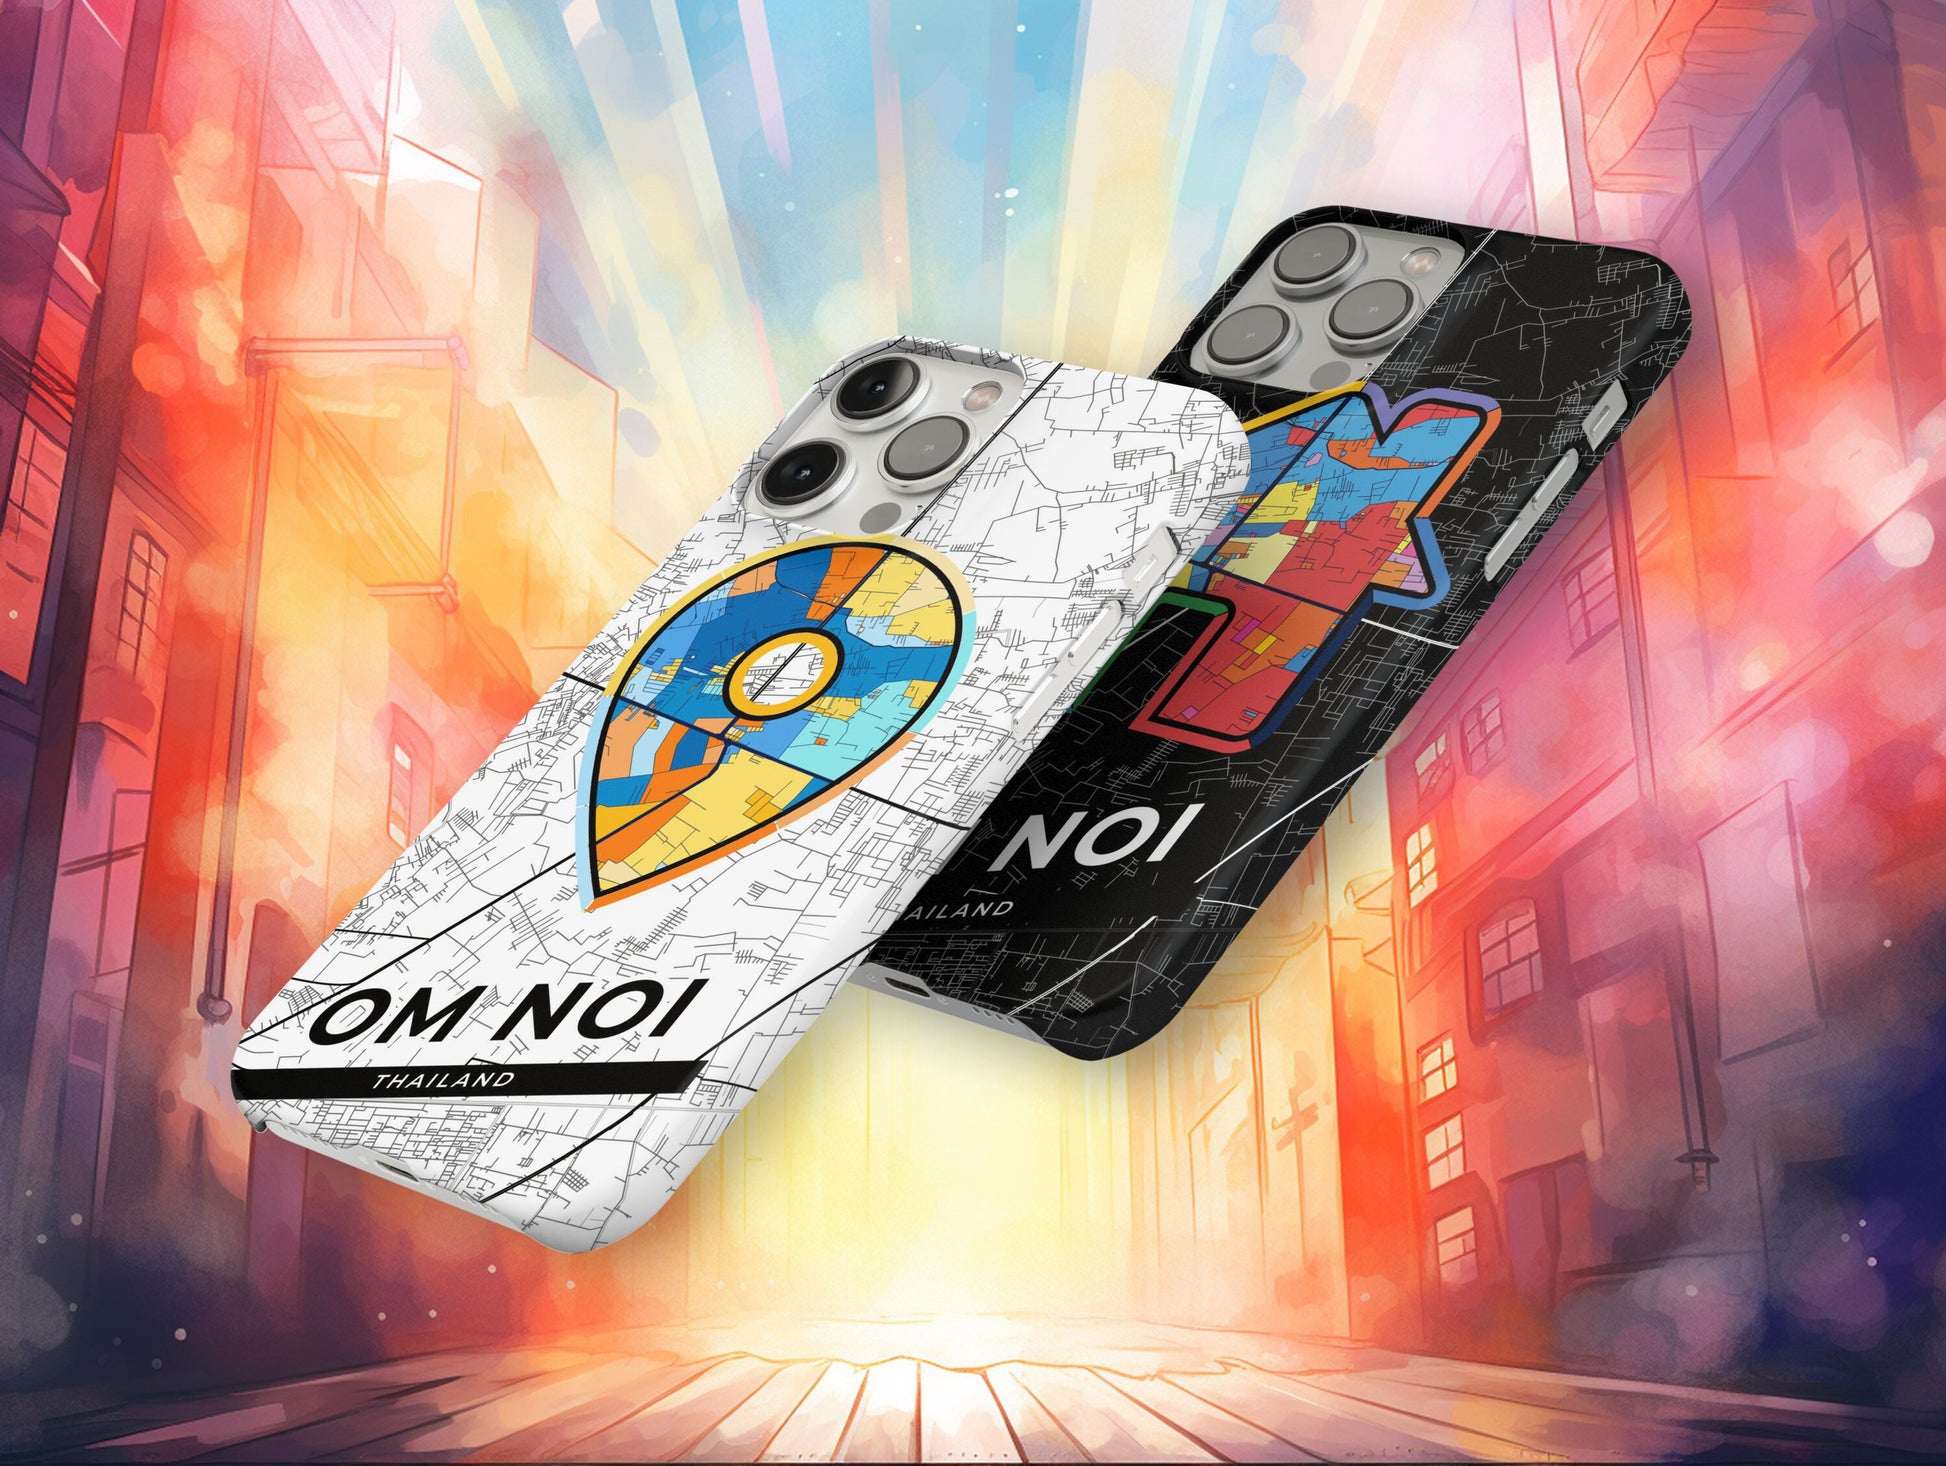 Om Noi Thailand slim phone case with colorful icon